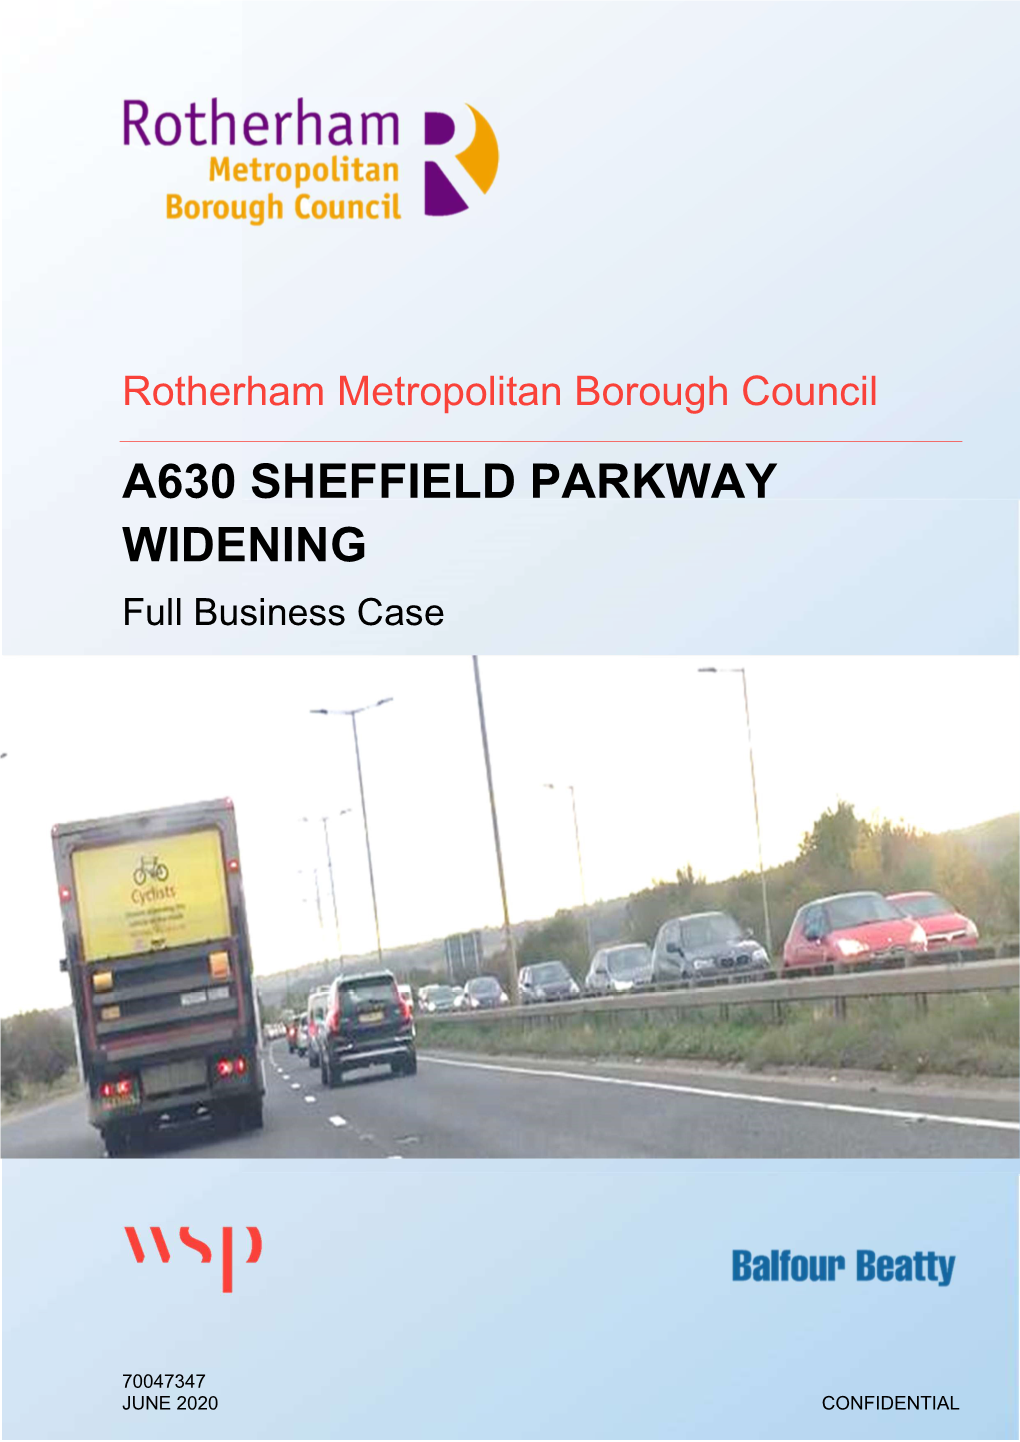 A630 SHEFFIELD PARKWAY WIDENING Full Business Case